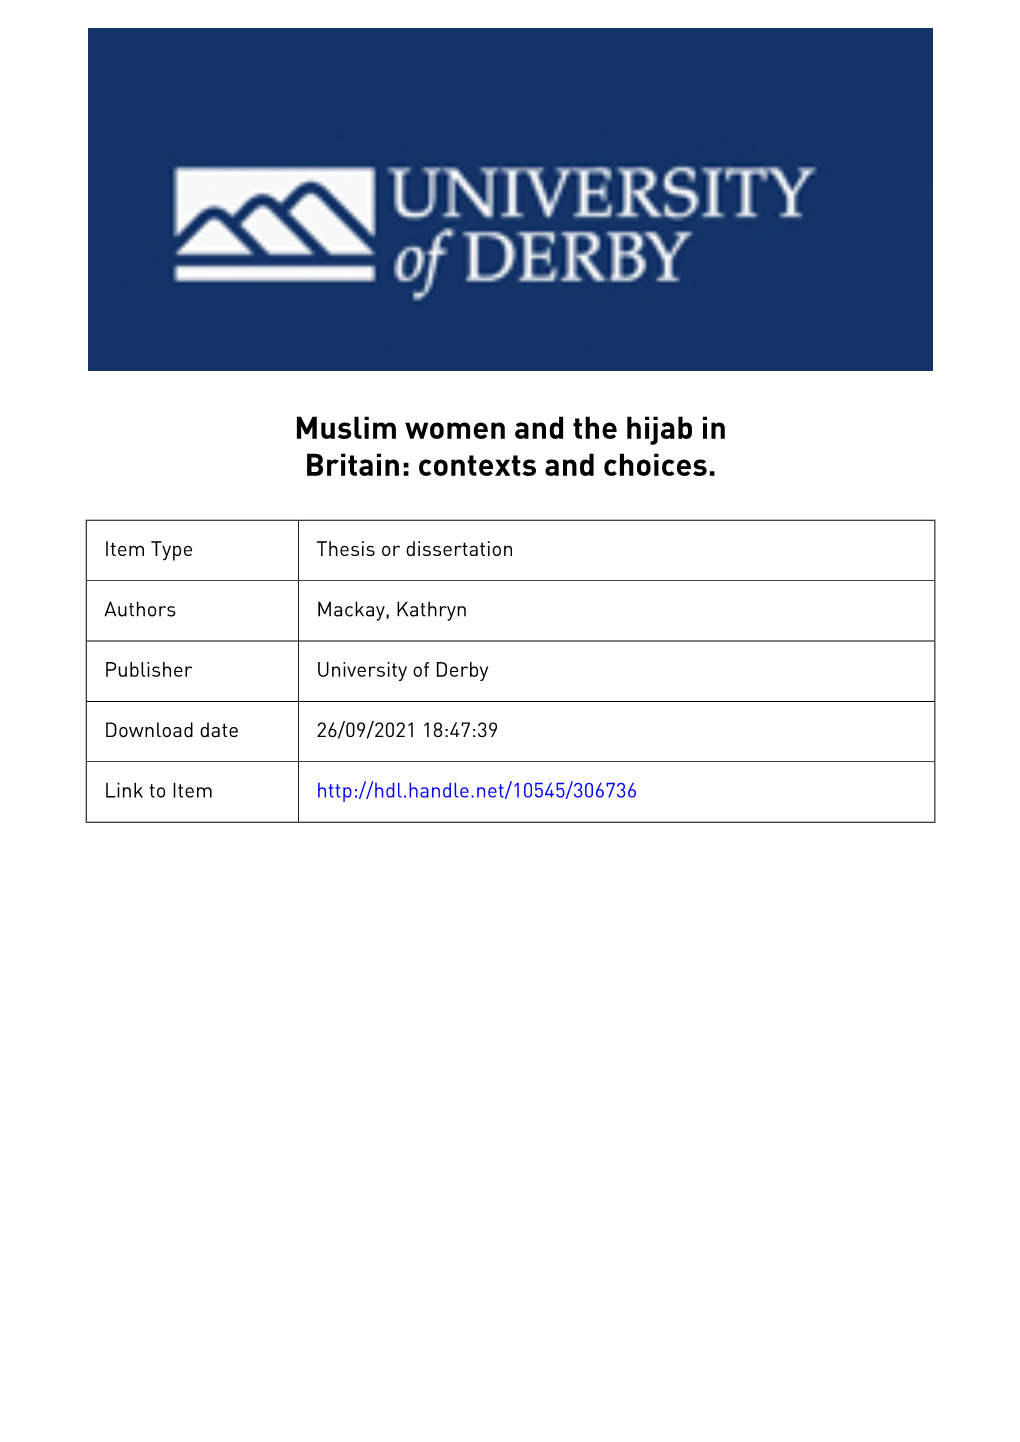 University of Derby Muslim Women and the Hijab in Britain